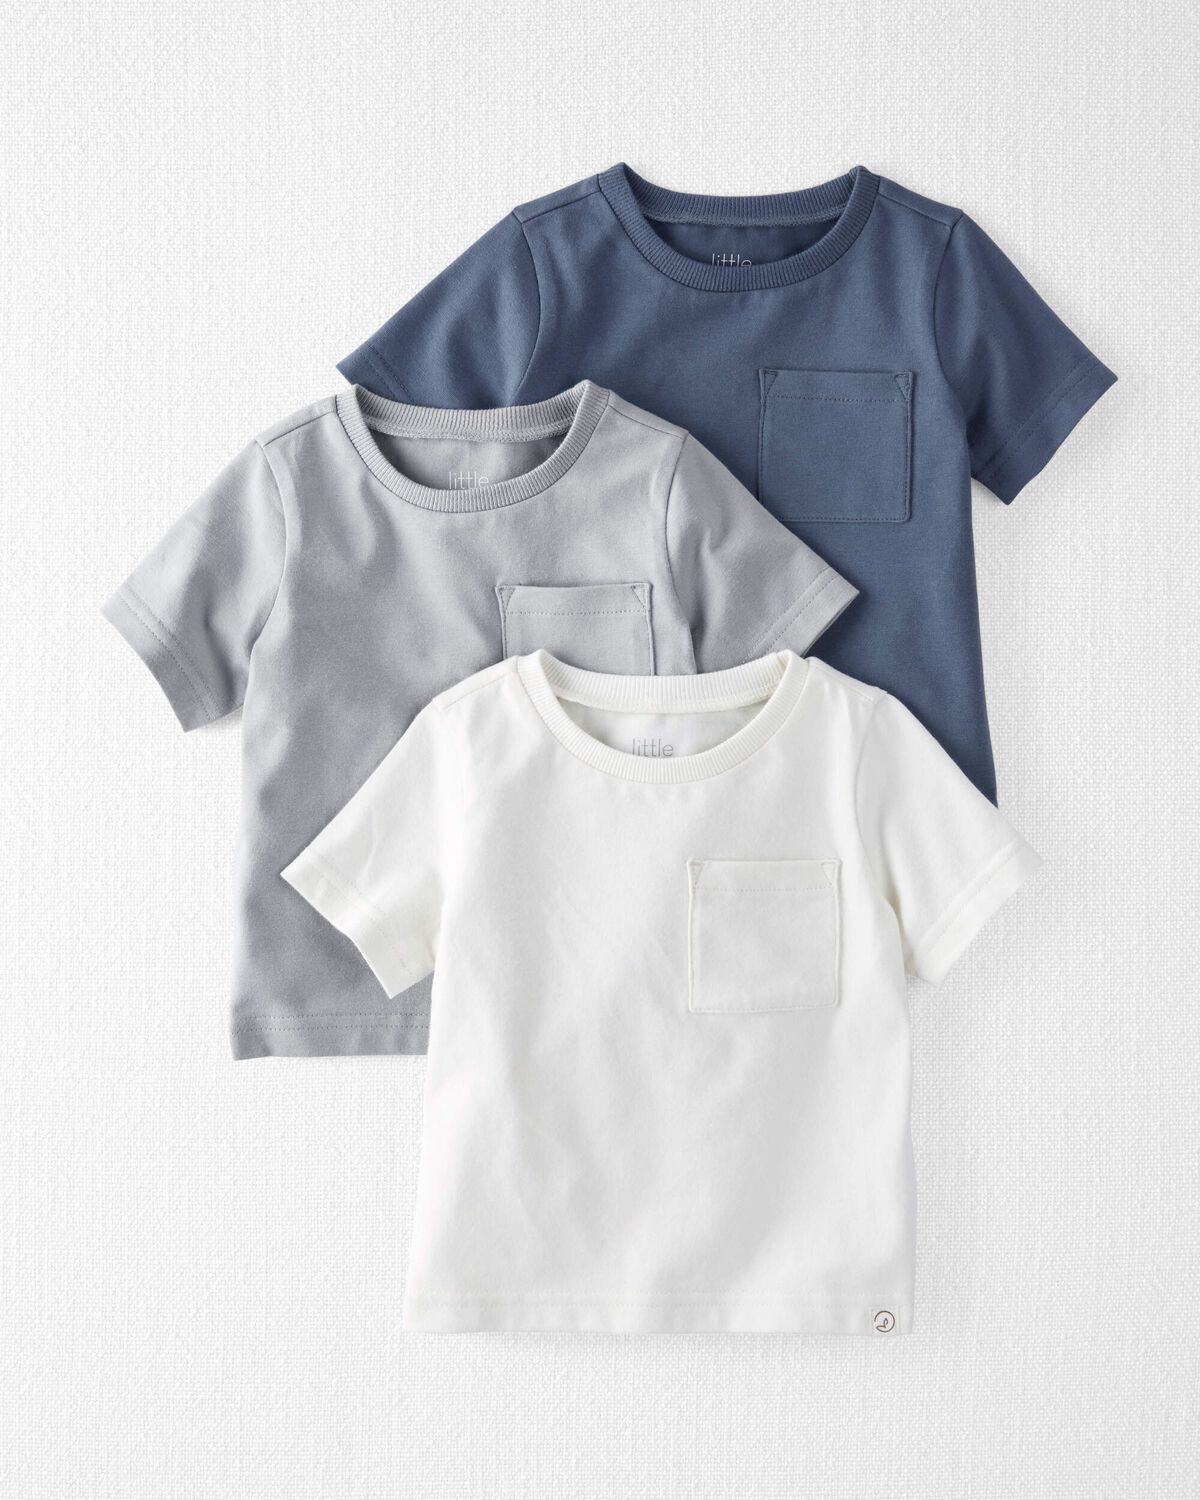 Multi Baby 3-Pack Organic Cotton Tees | carters.com | Carter's